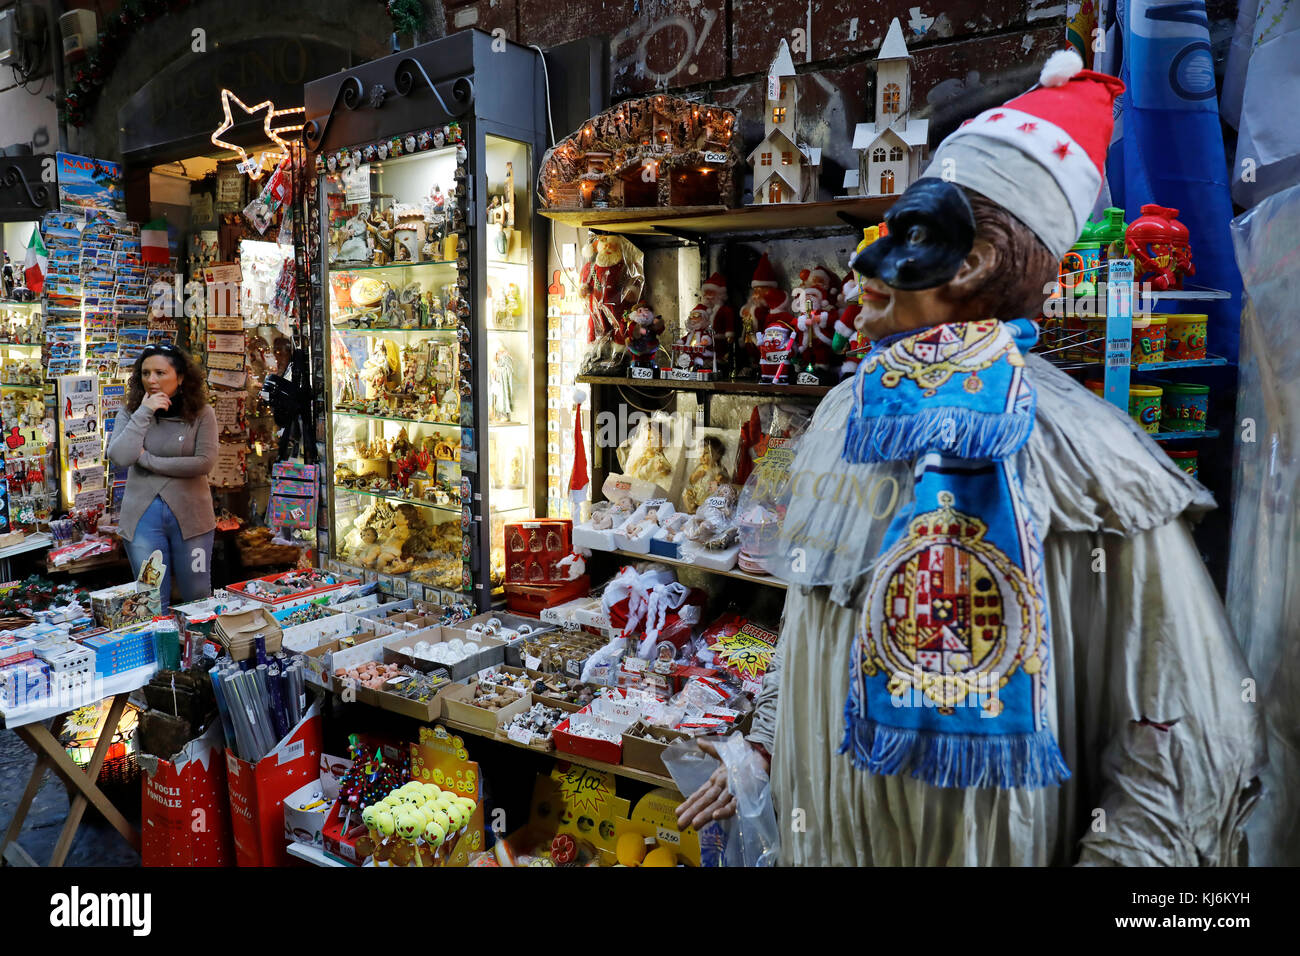 Naples, Italy - November 18, 2017: The Christmas holiday atmosphere in the heart of the city. Via San Biagio dei Librai, exhibition and sale of small  Stock Photo